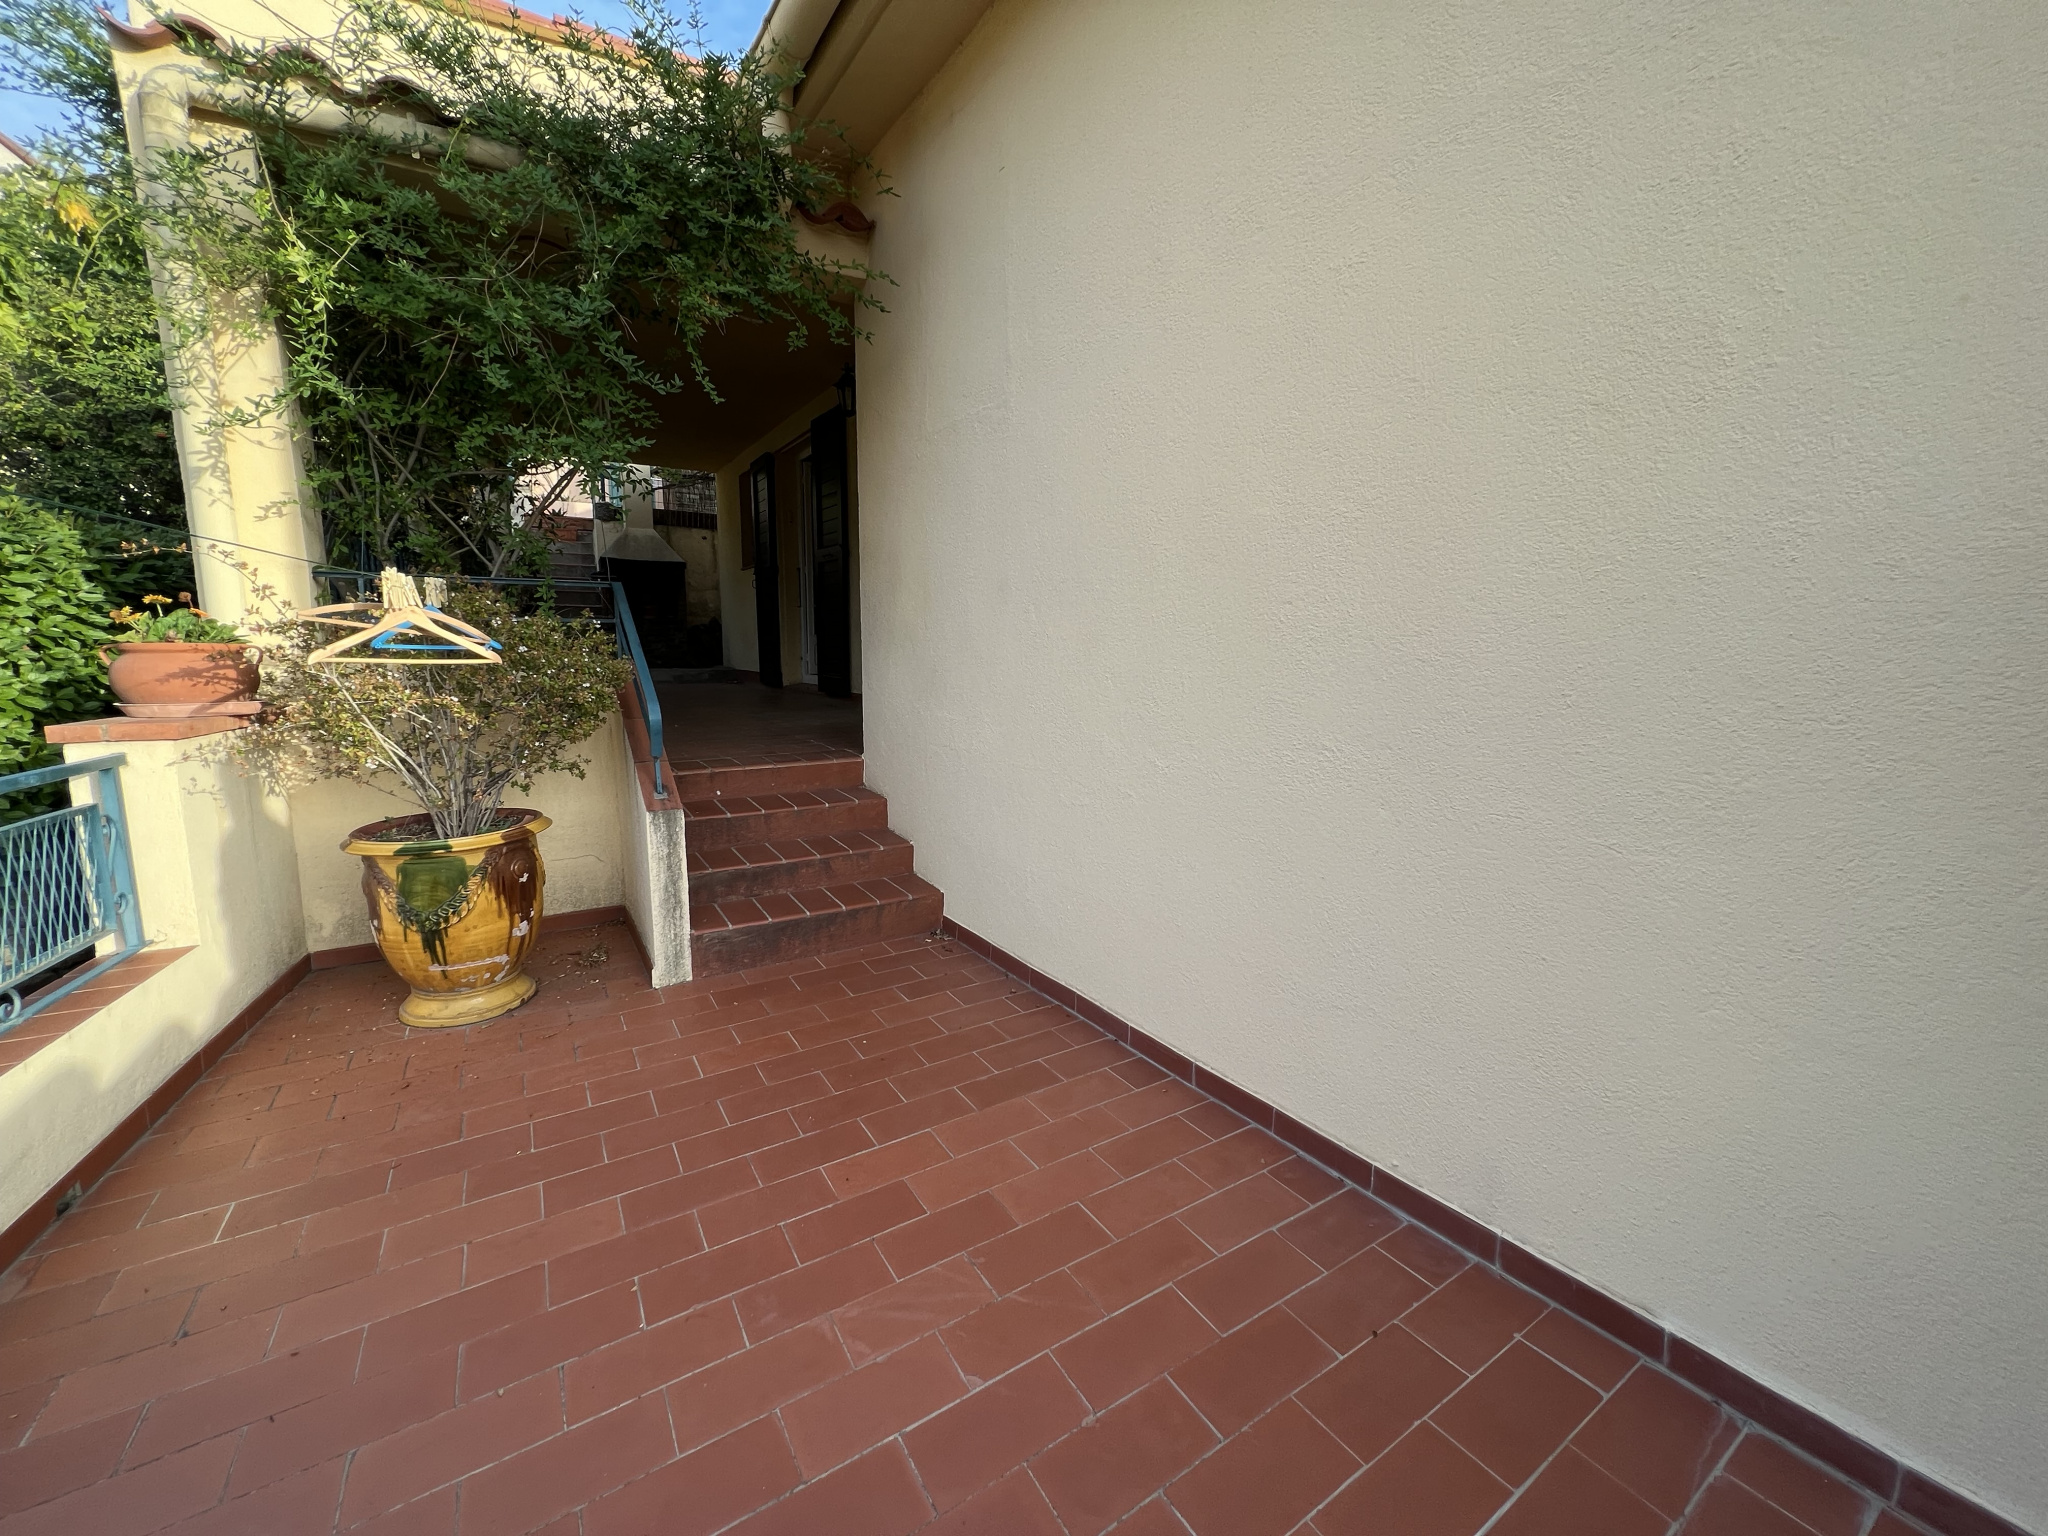 3 bedroom villa with large garage in Collioure